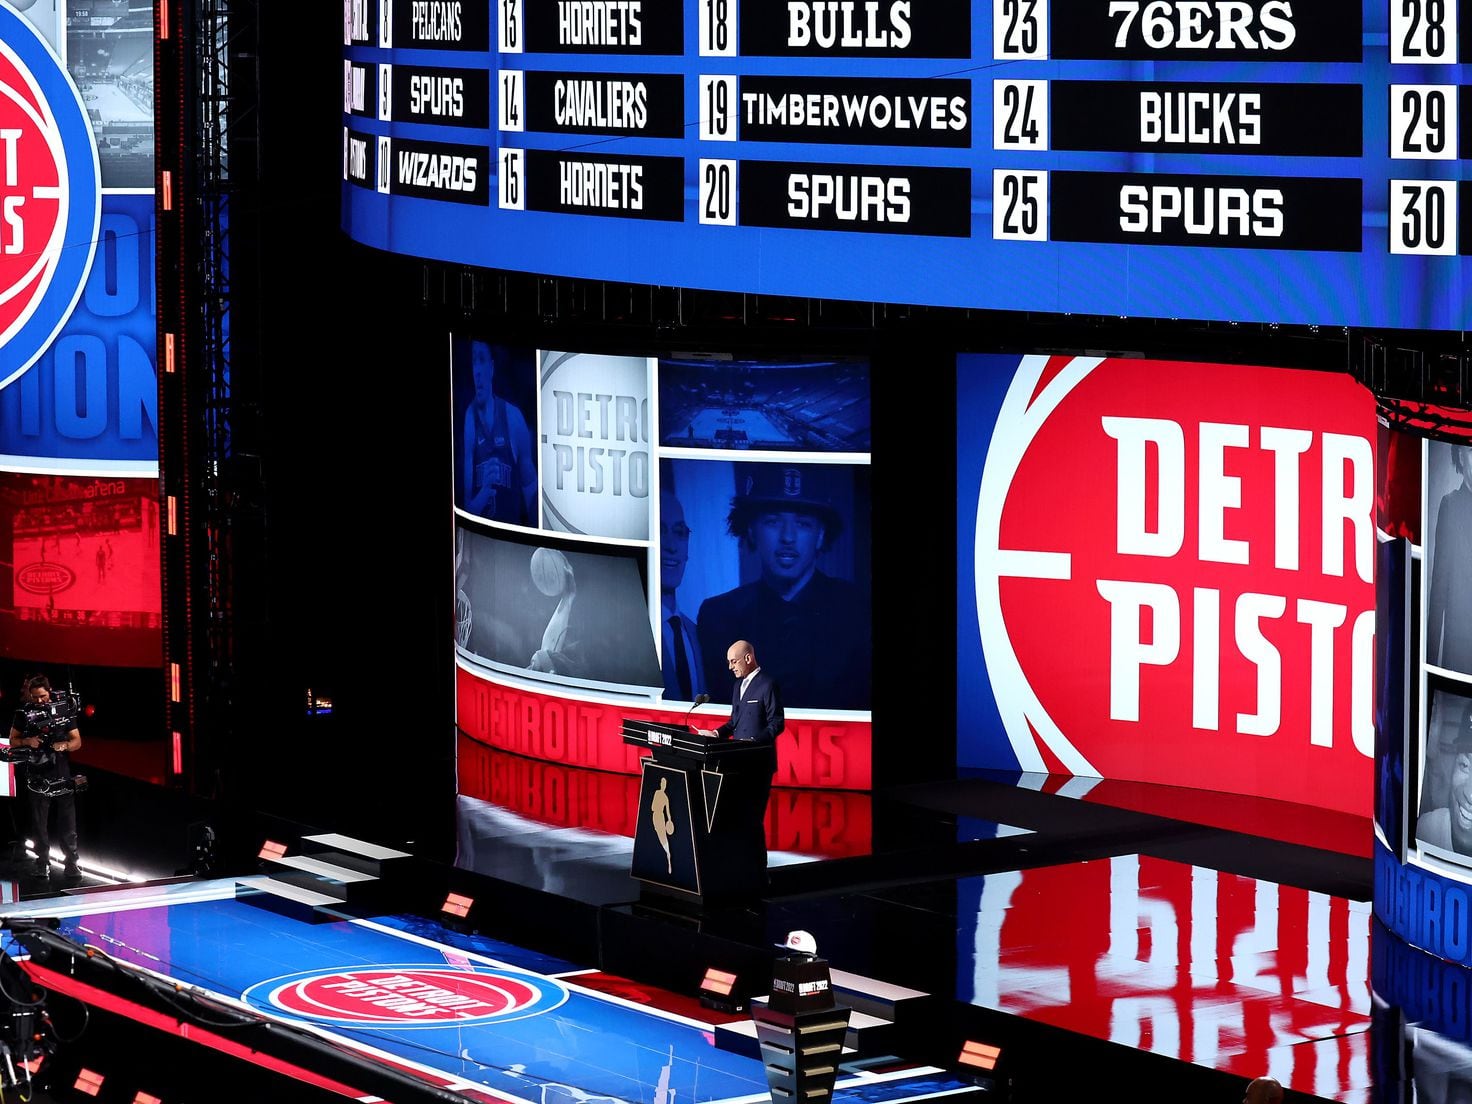 2023 NBA Draft: Who do the mock drafts have the Wizards picking at